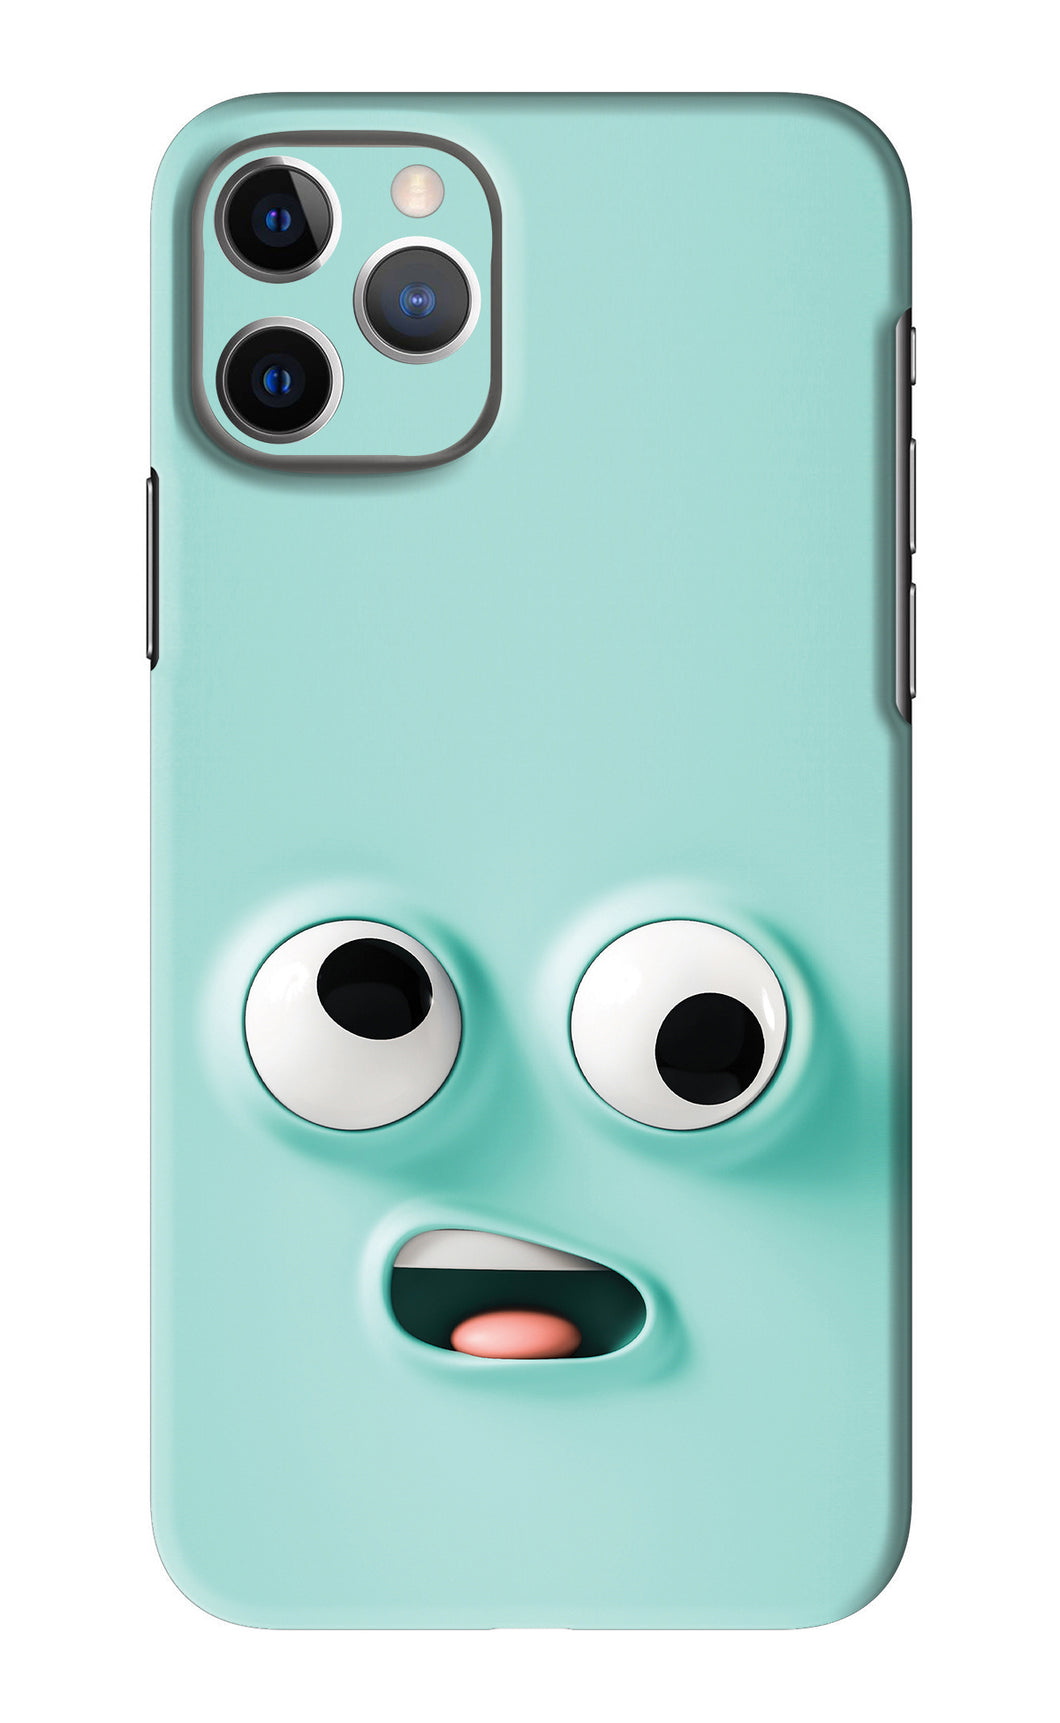 Silly Face Cartoon iPhone 11 Pro Back Skin Wrap